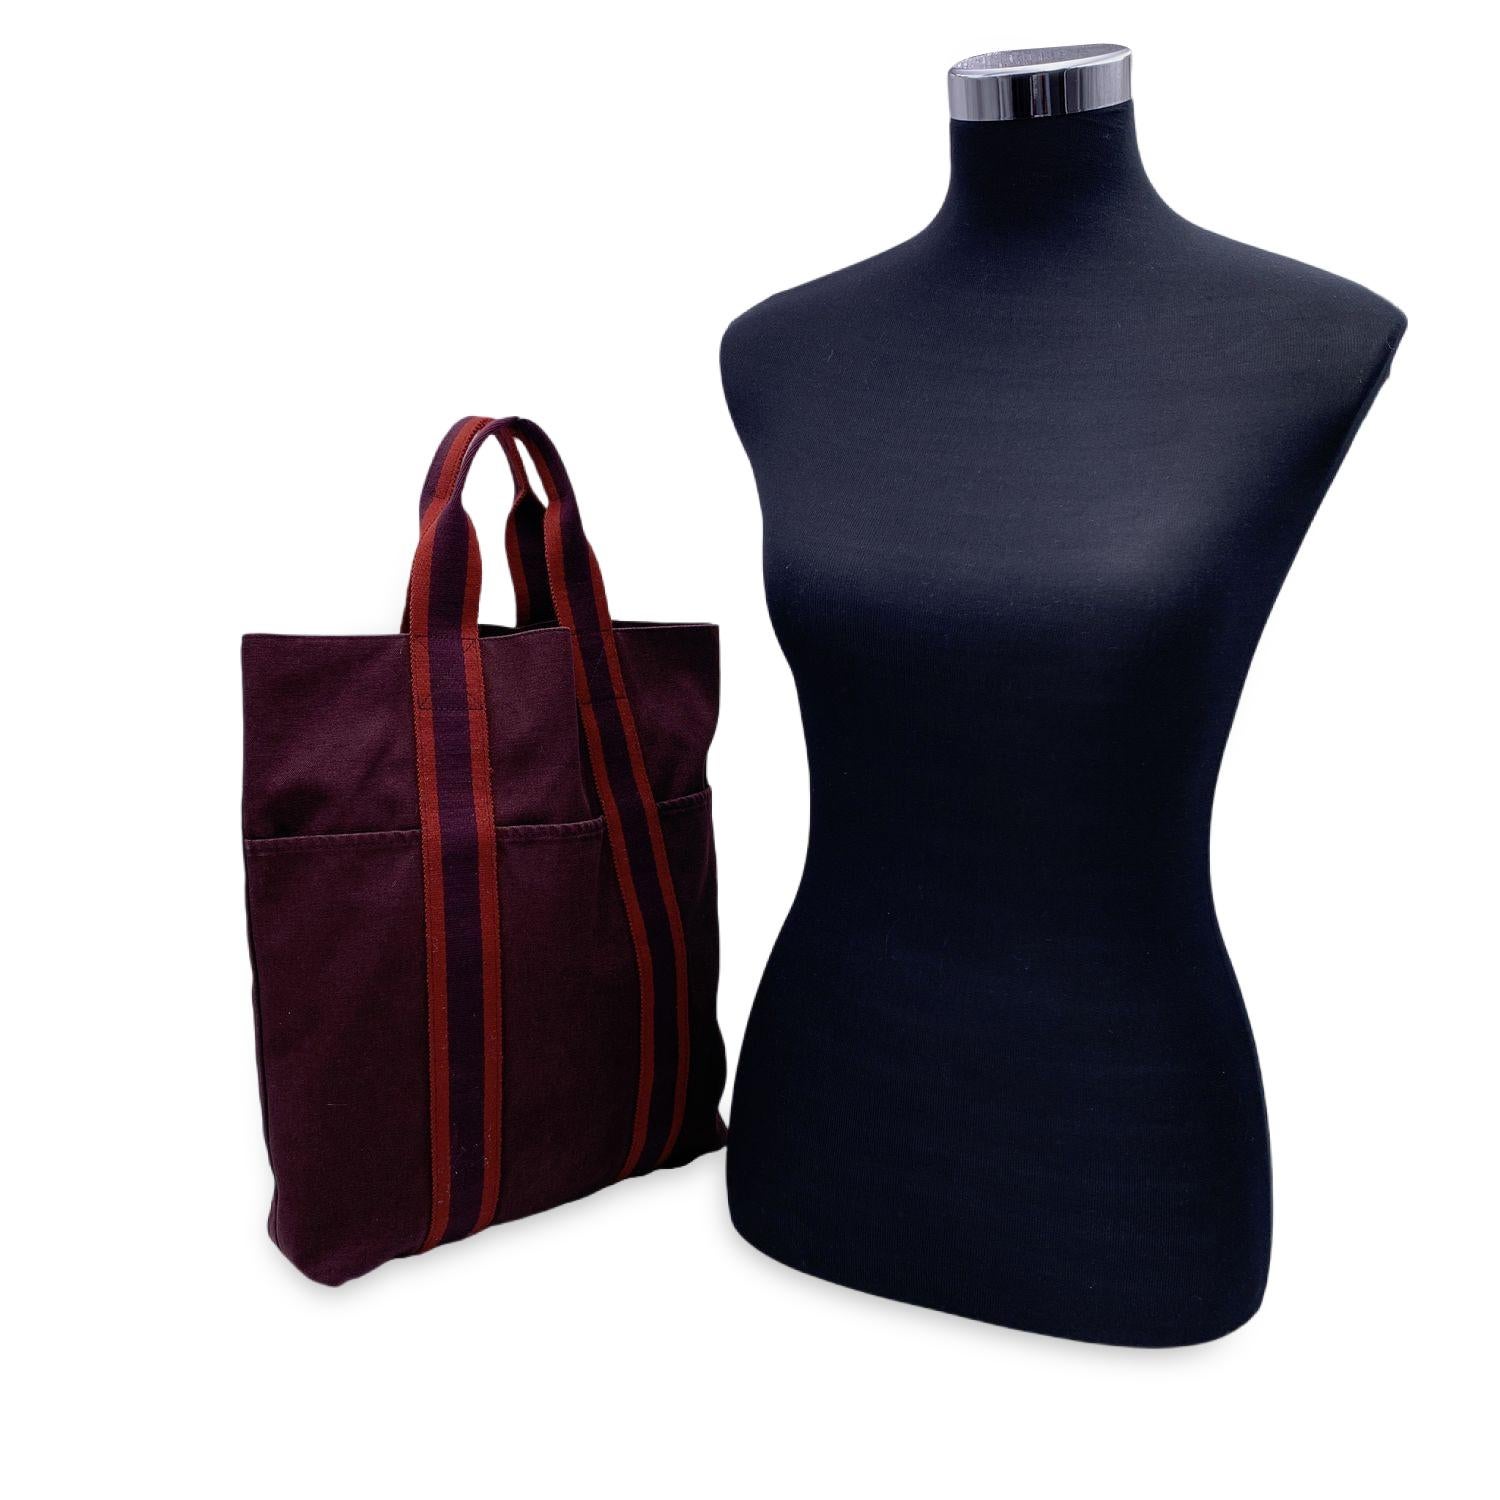 Model: 'HERMES Vertical FOURRE TOUT ' Shopping Bag. Made in France. Brown/burgundy color with red stripes. Material: 100% cotton. Durable canvas handles, perfect for casual and everyday use. Open top. 3 open pockets on the front Canvas internal